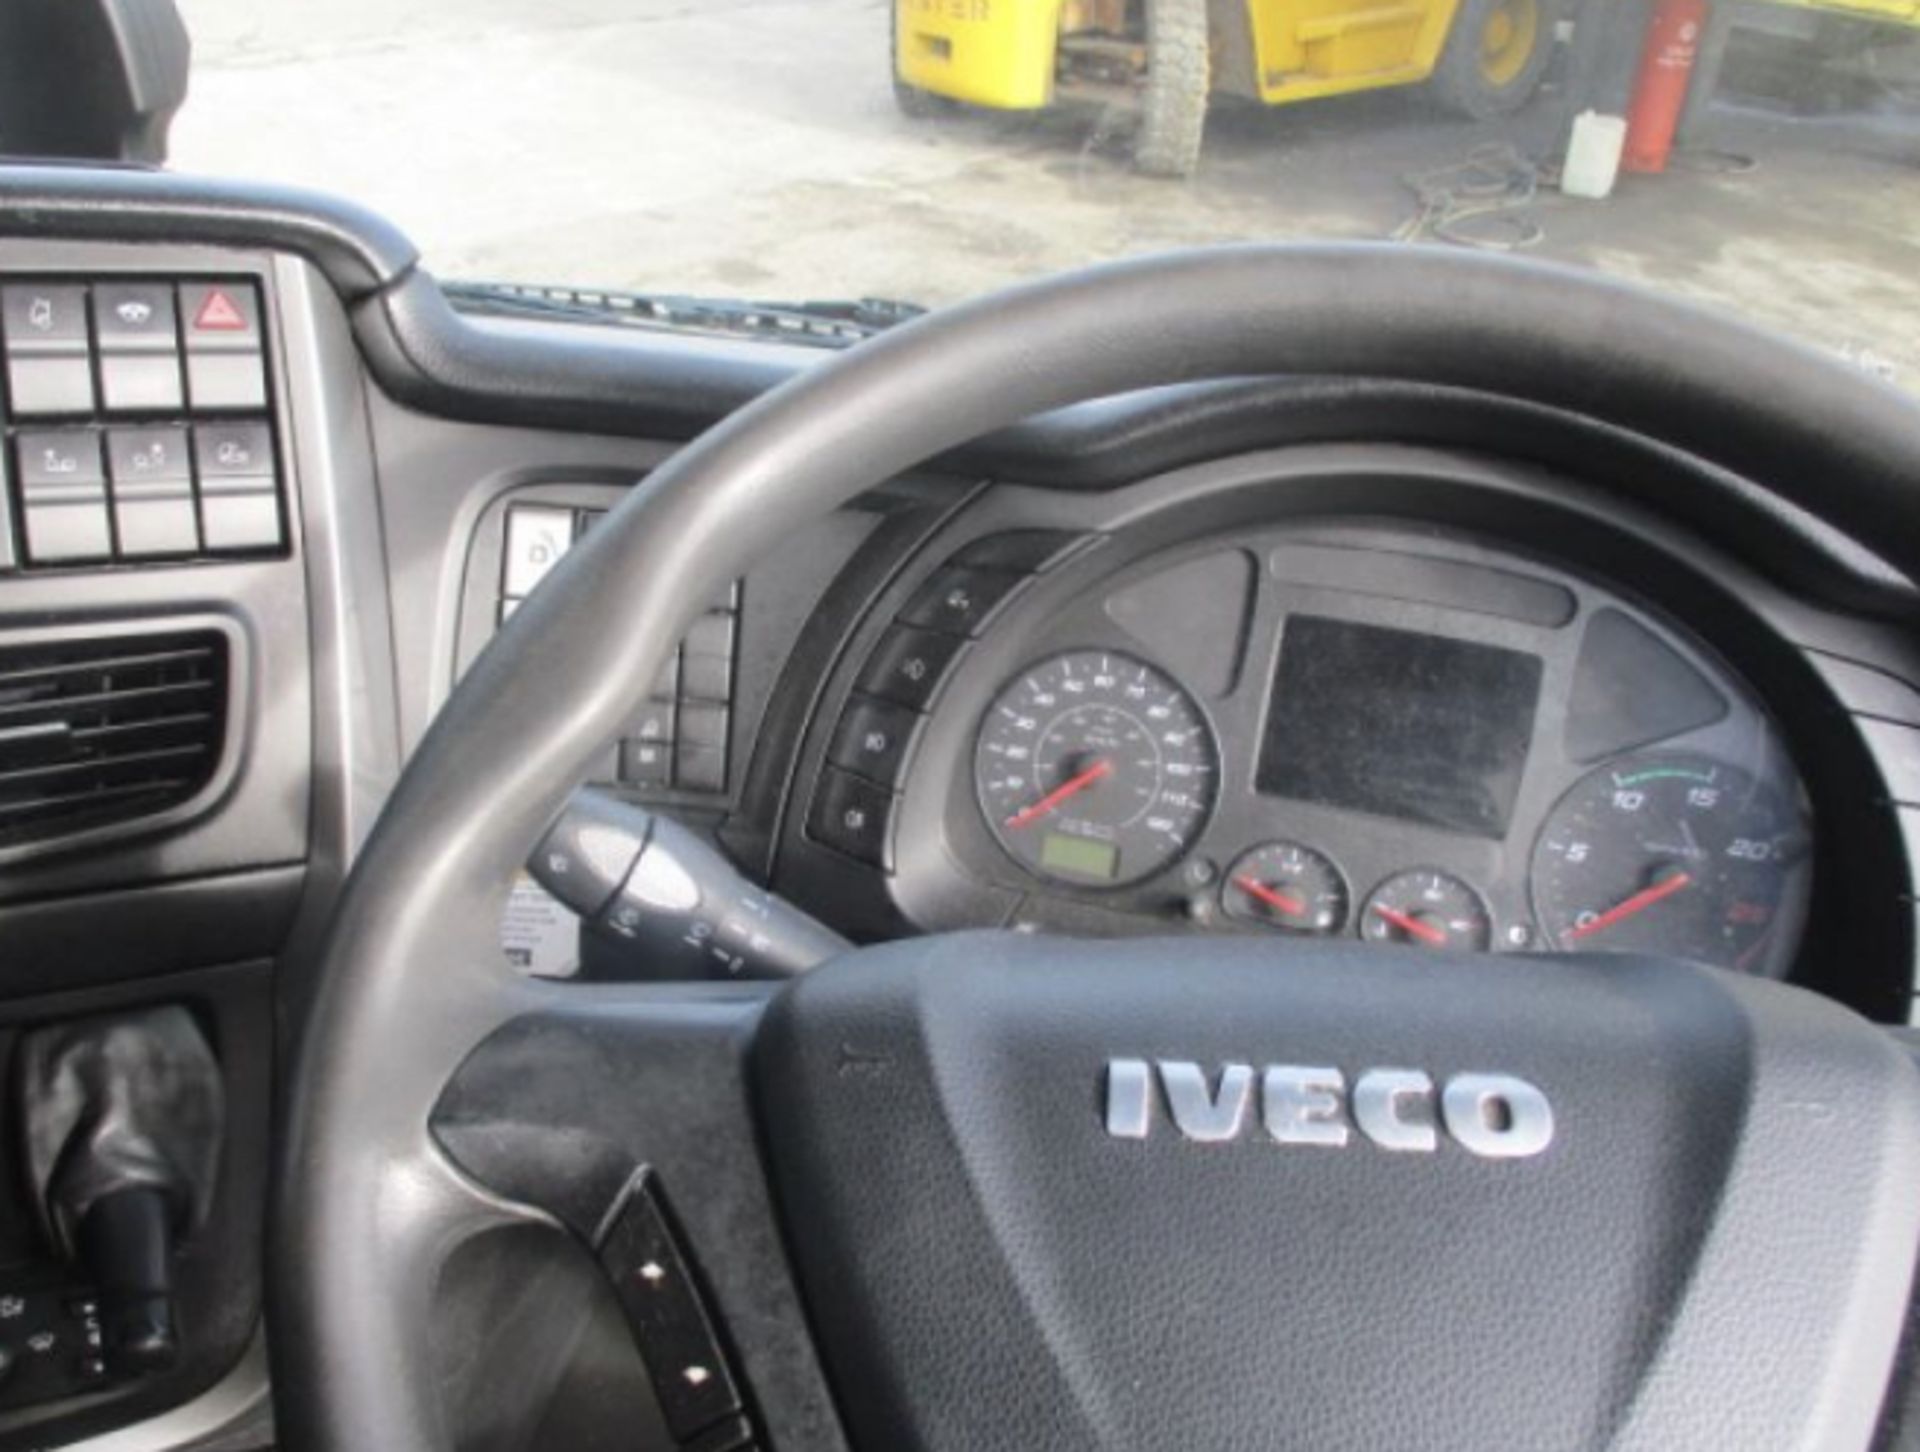 IVECO STRALIS 460 - Image 11 of 14